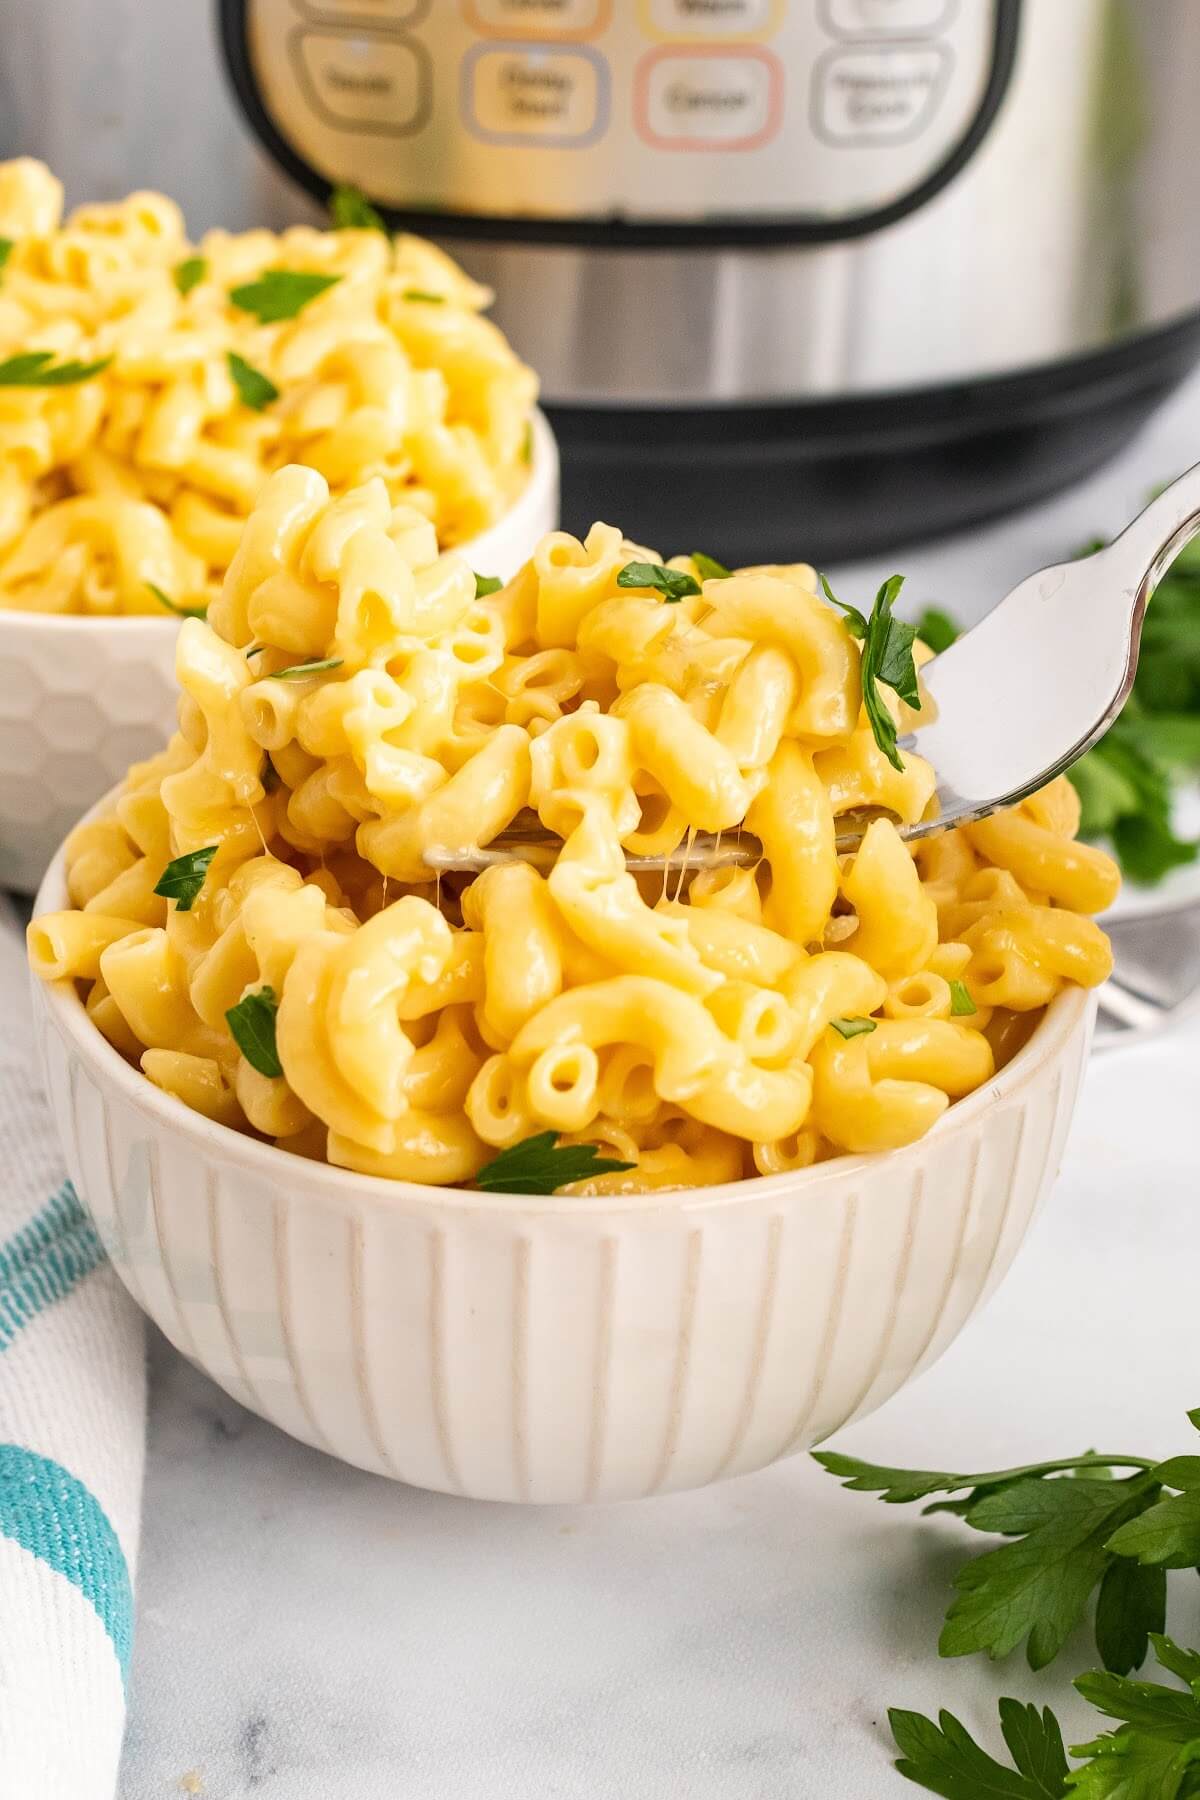 Two bowls full of homemade Mac and cheese, one with a fork dipping into the Mac and cheese, garnished with fresh parsley sitting next to fresh Italian parsley sprigs, a cloth kitchen towel and an Instant Pot.